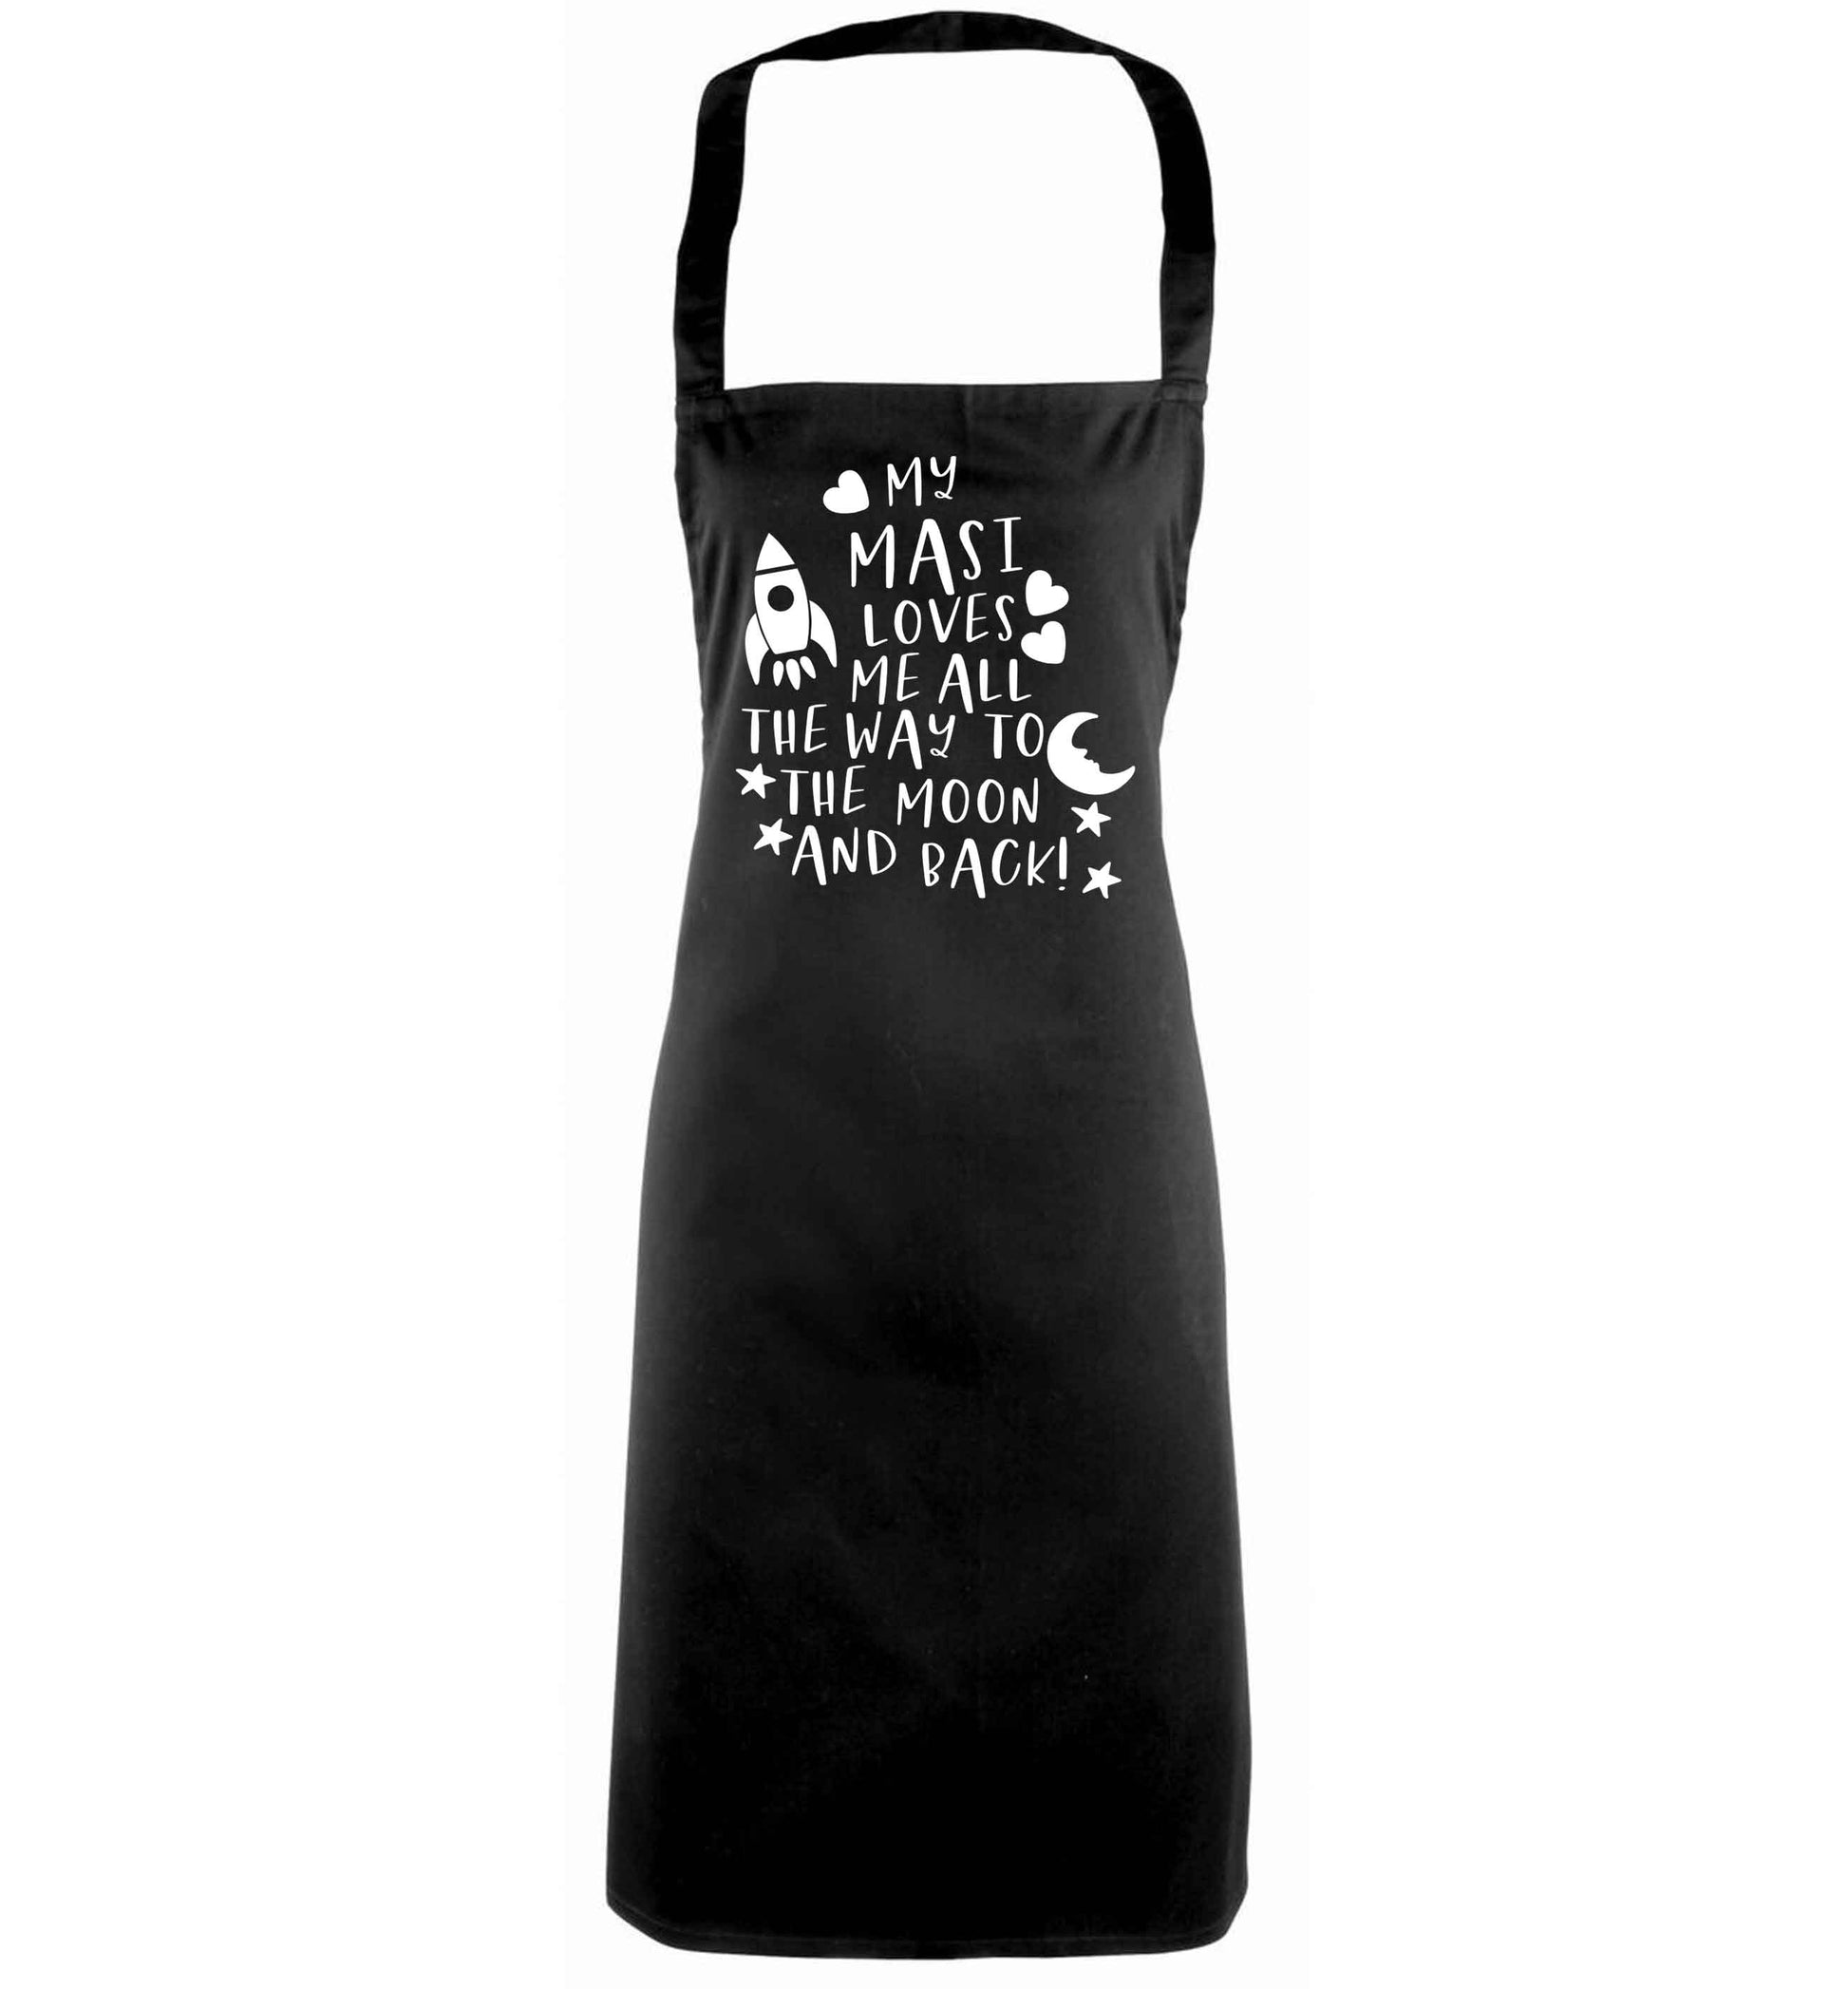 My masi loves me all the way to the moon and back black apron